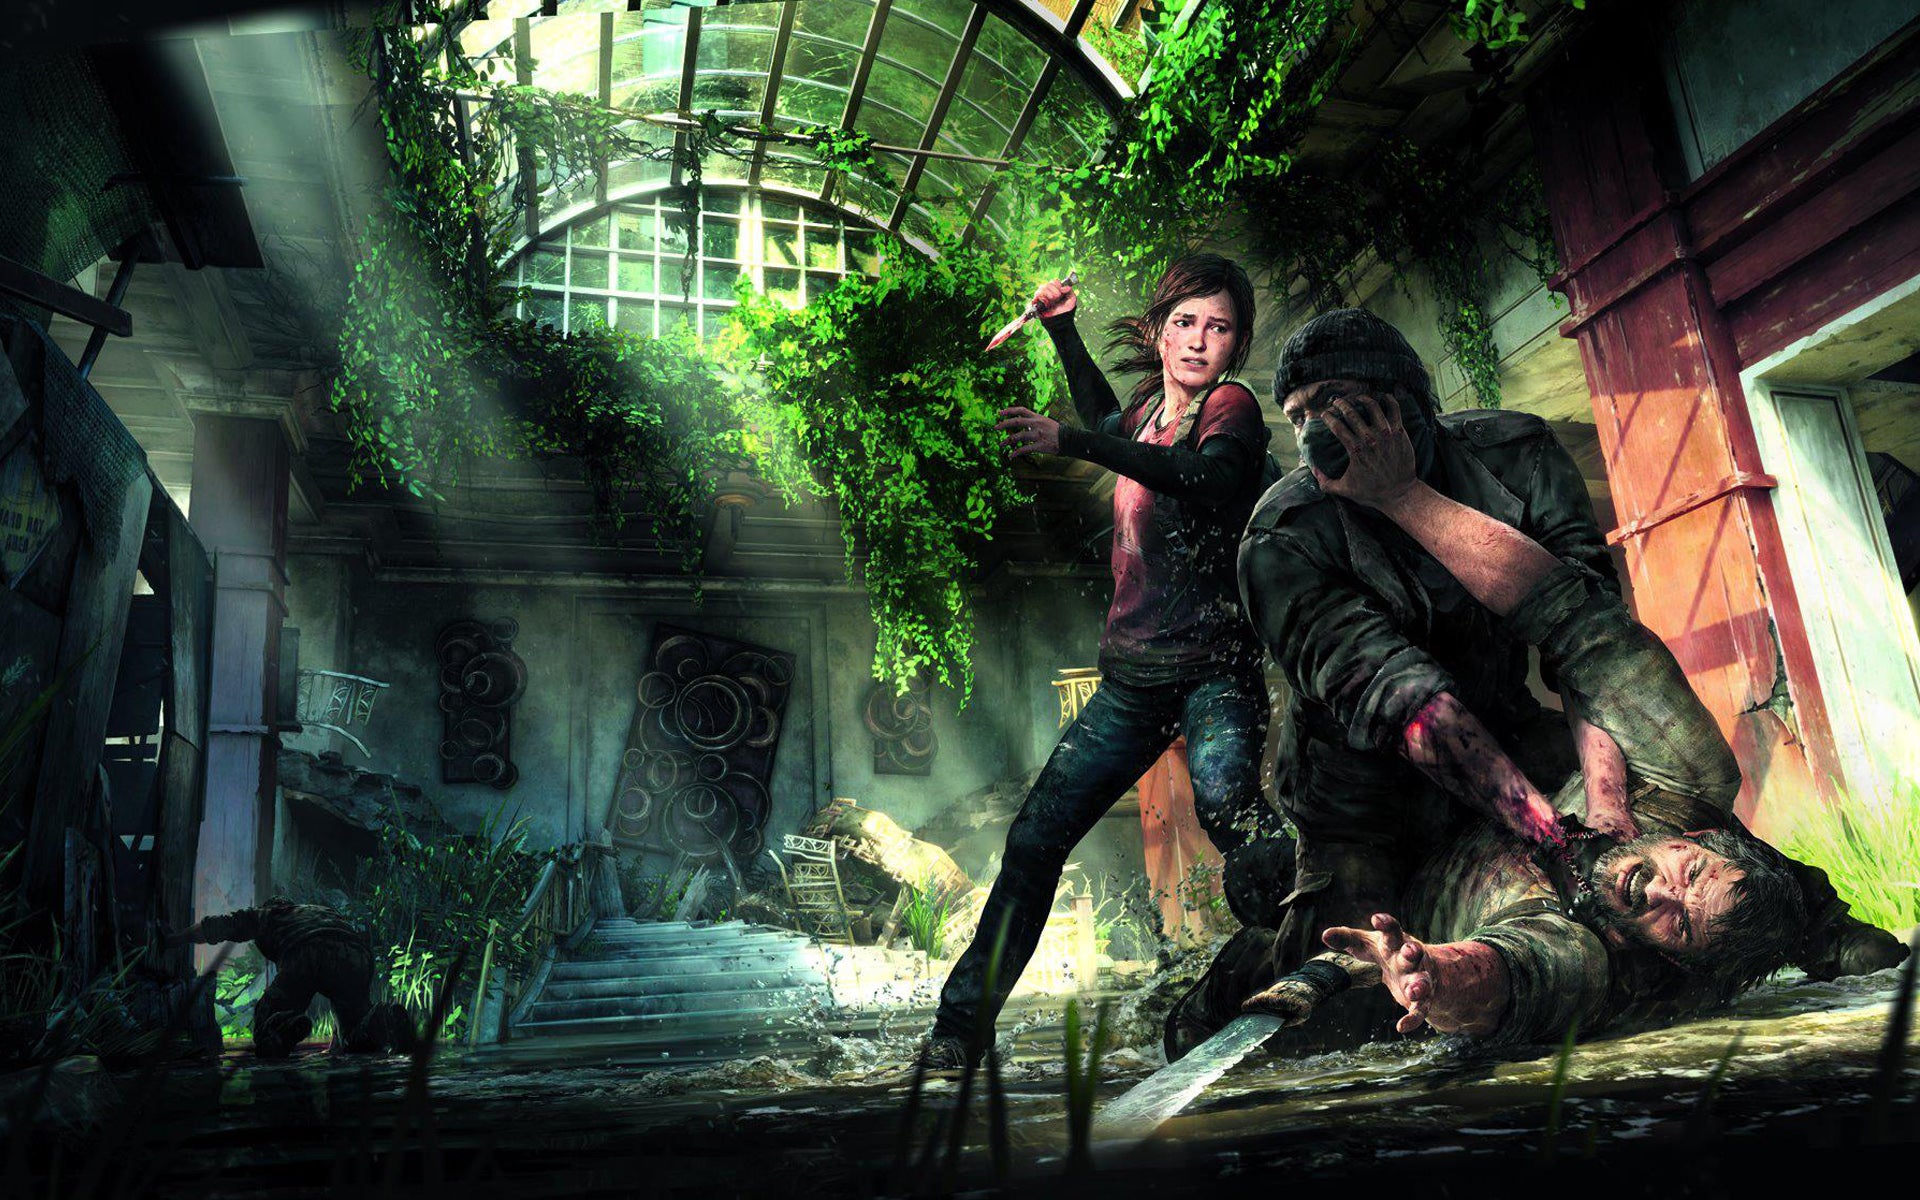 The Last of Us will be turned into a film by developers Naughty Dog and Ghost House Pictures